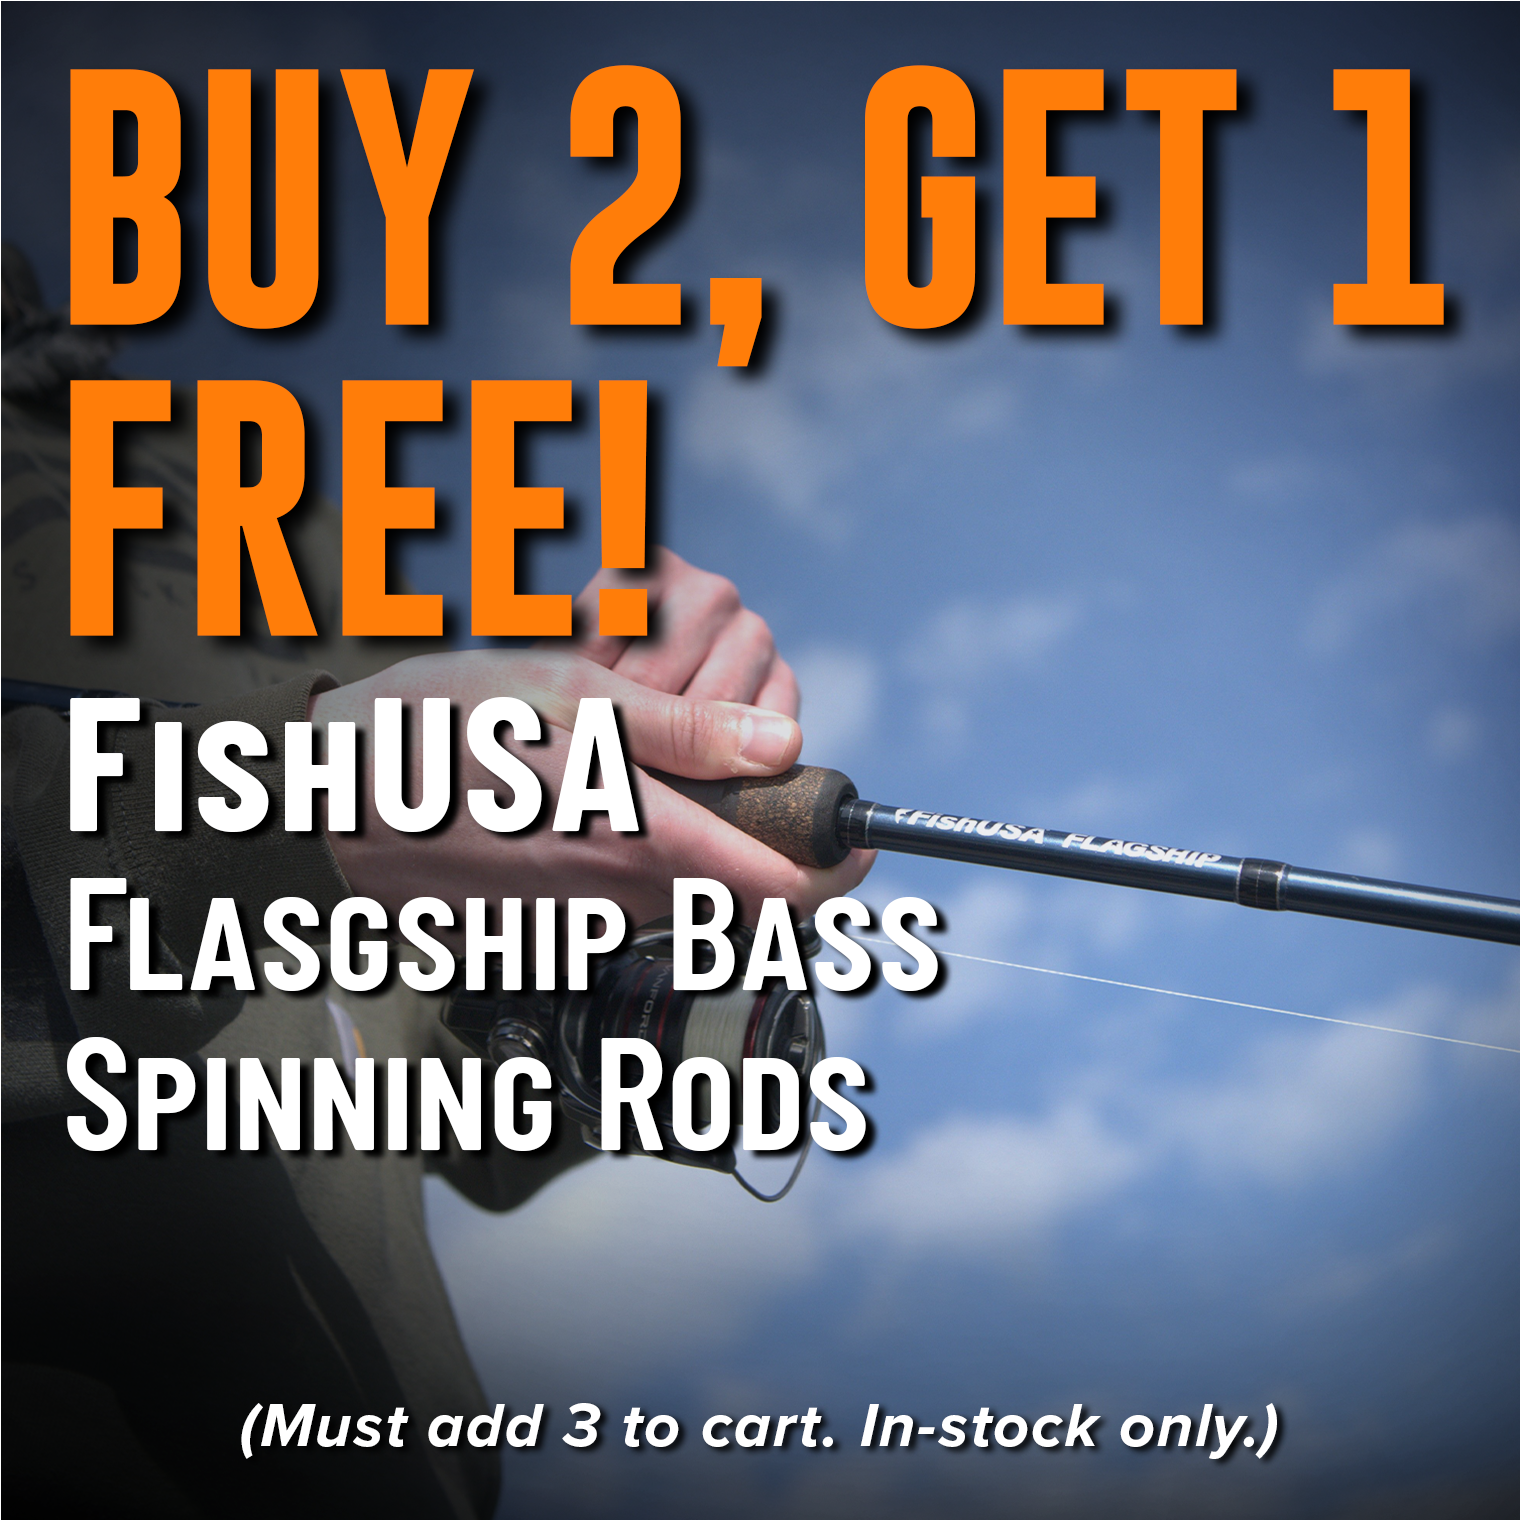 Buy 2, Get 1 Free! FishUSA Flagship Bass Spinning Rods (Must add 3 to cart. In-stock only.)